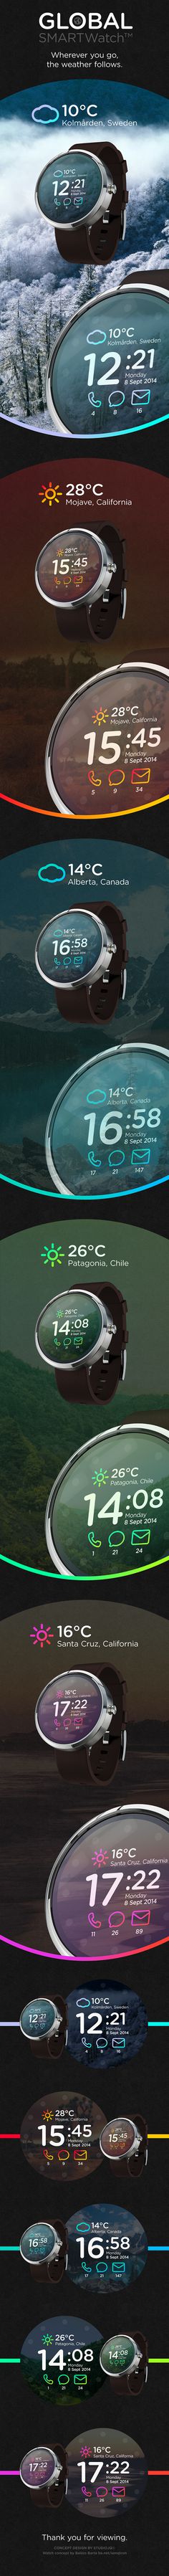 Global SMARTWatch™ // Concept on Behance #ios8 #smartwatch #weather #ux #interface #iwatch #ui #clean #concept #watch #wristwatch #ios